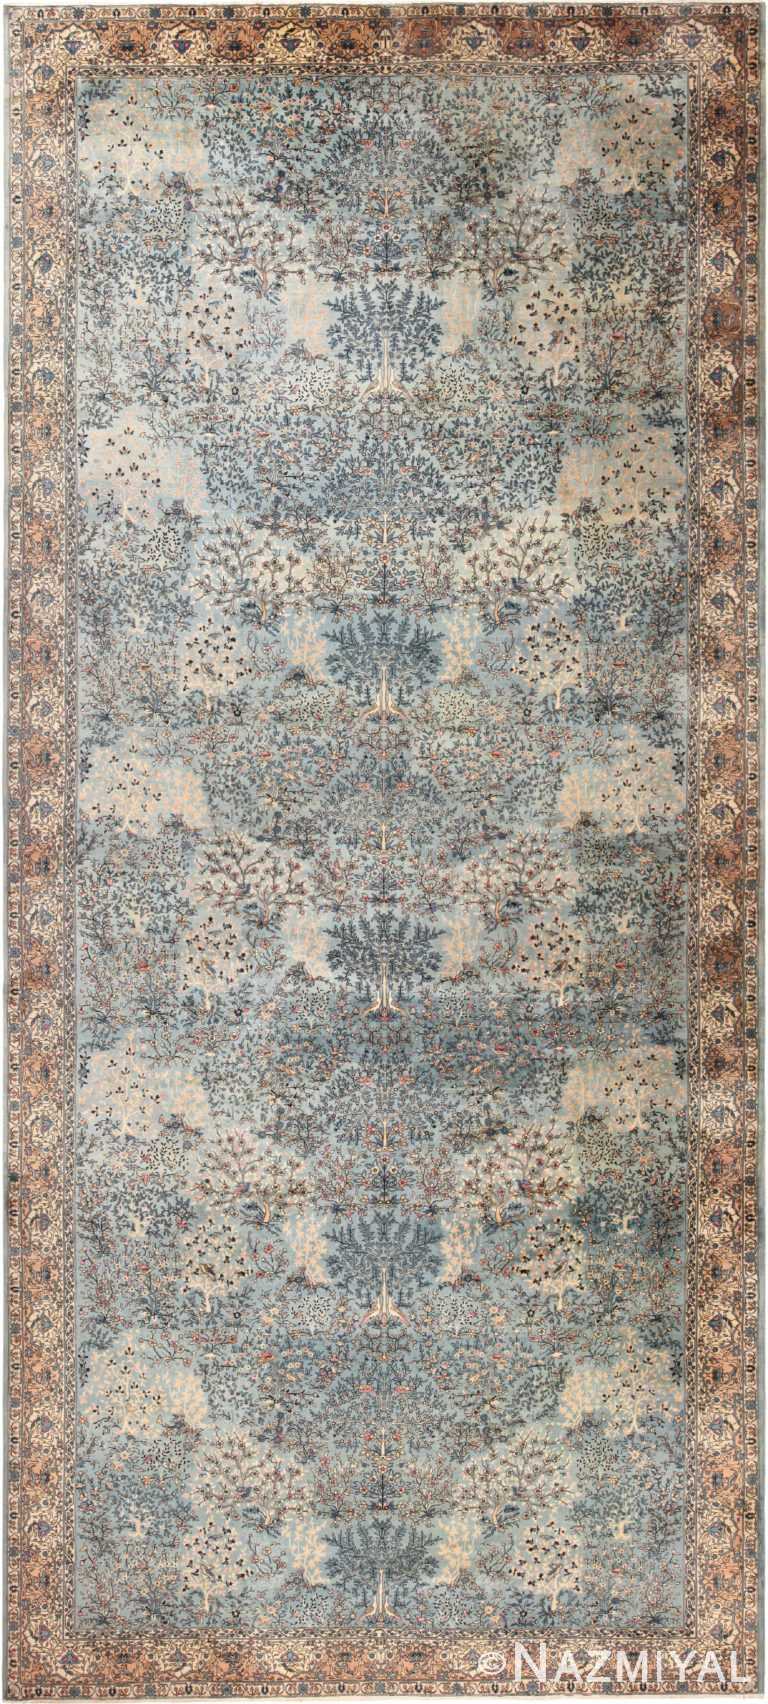 Antique Indian Agra Rug 71288 by Nazmiyal Antique Rugs